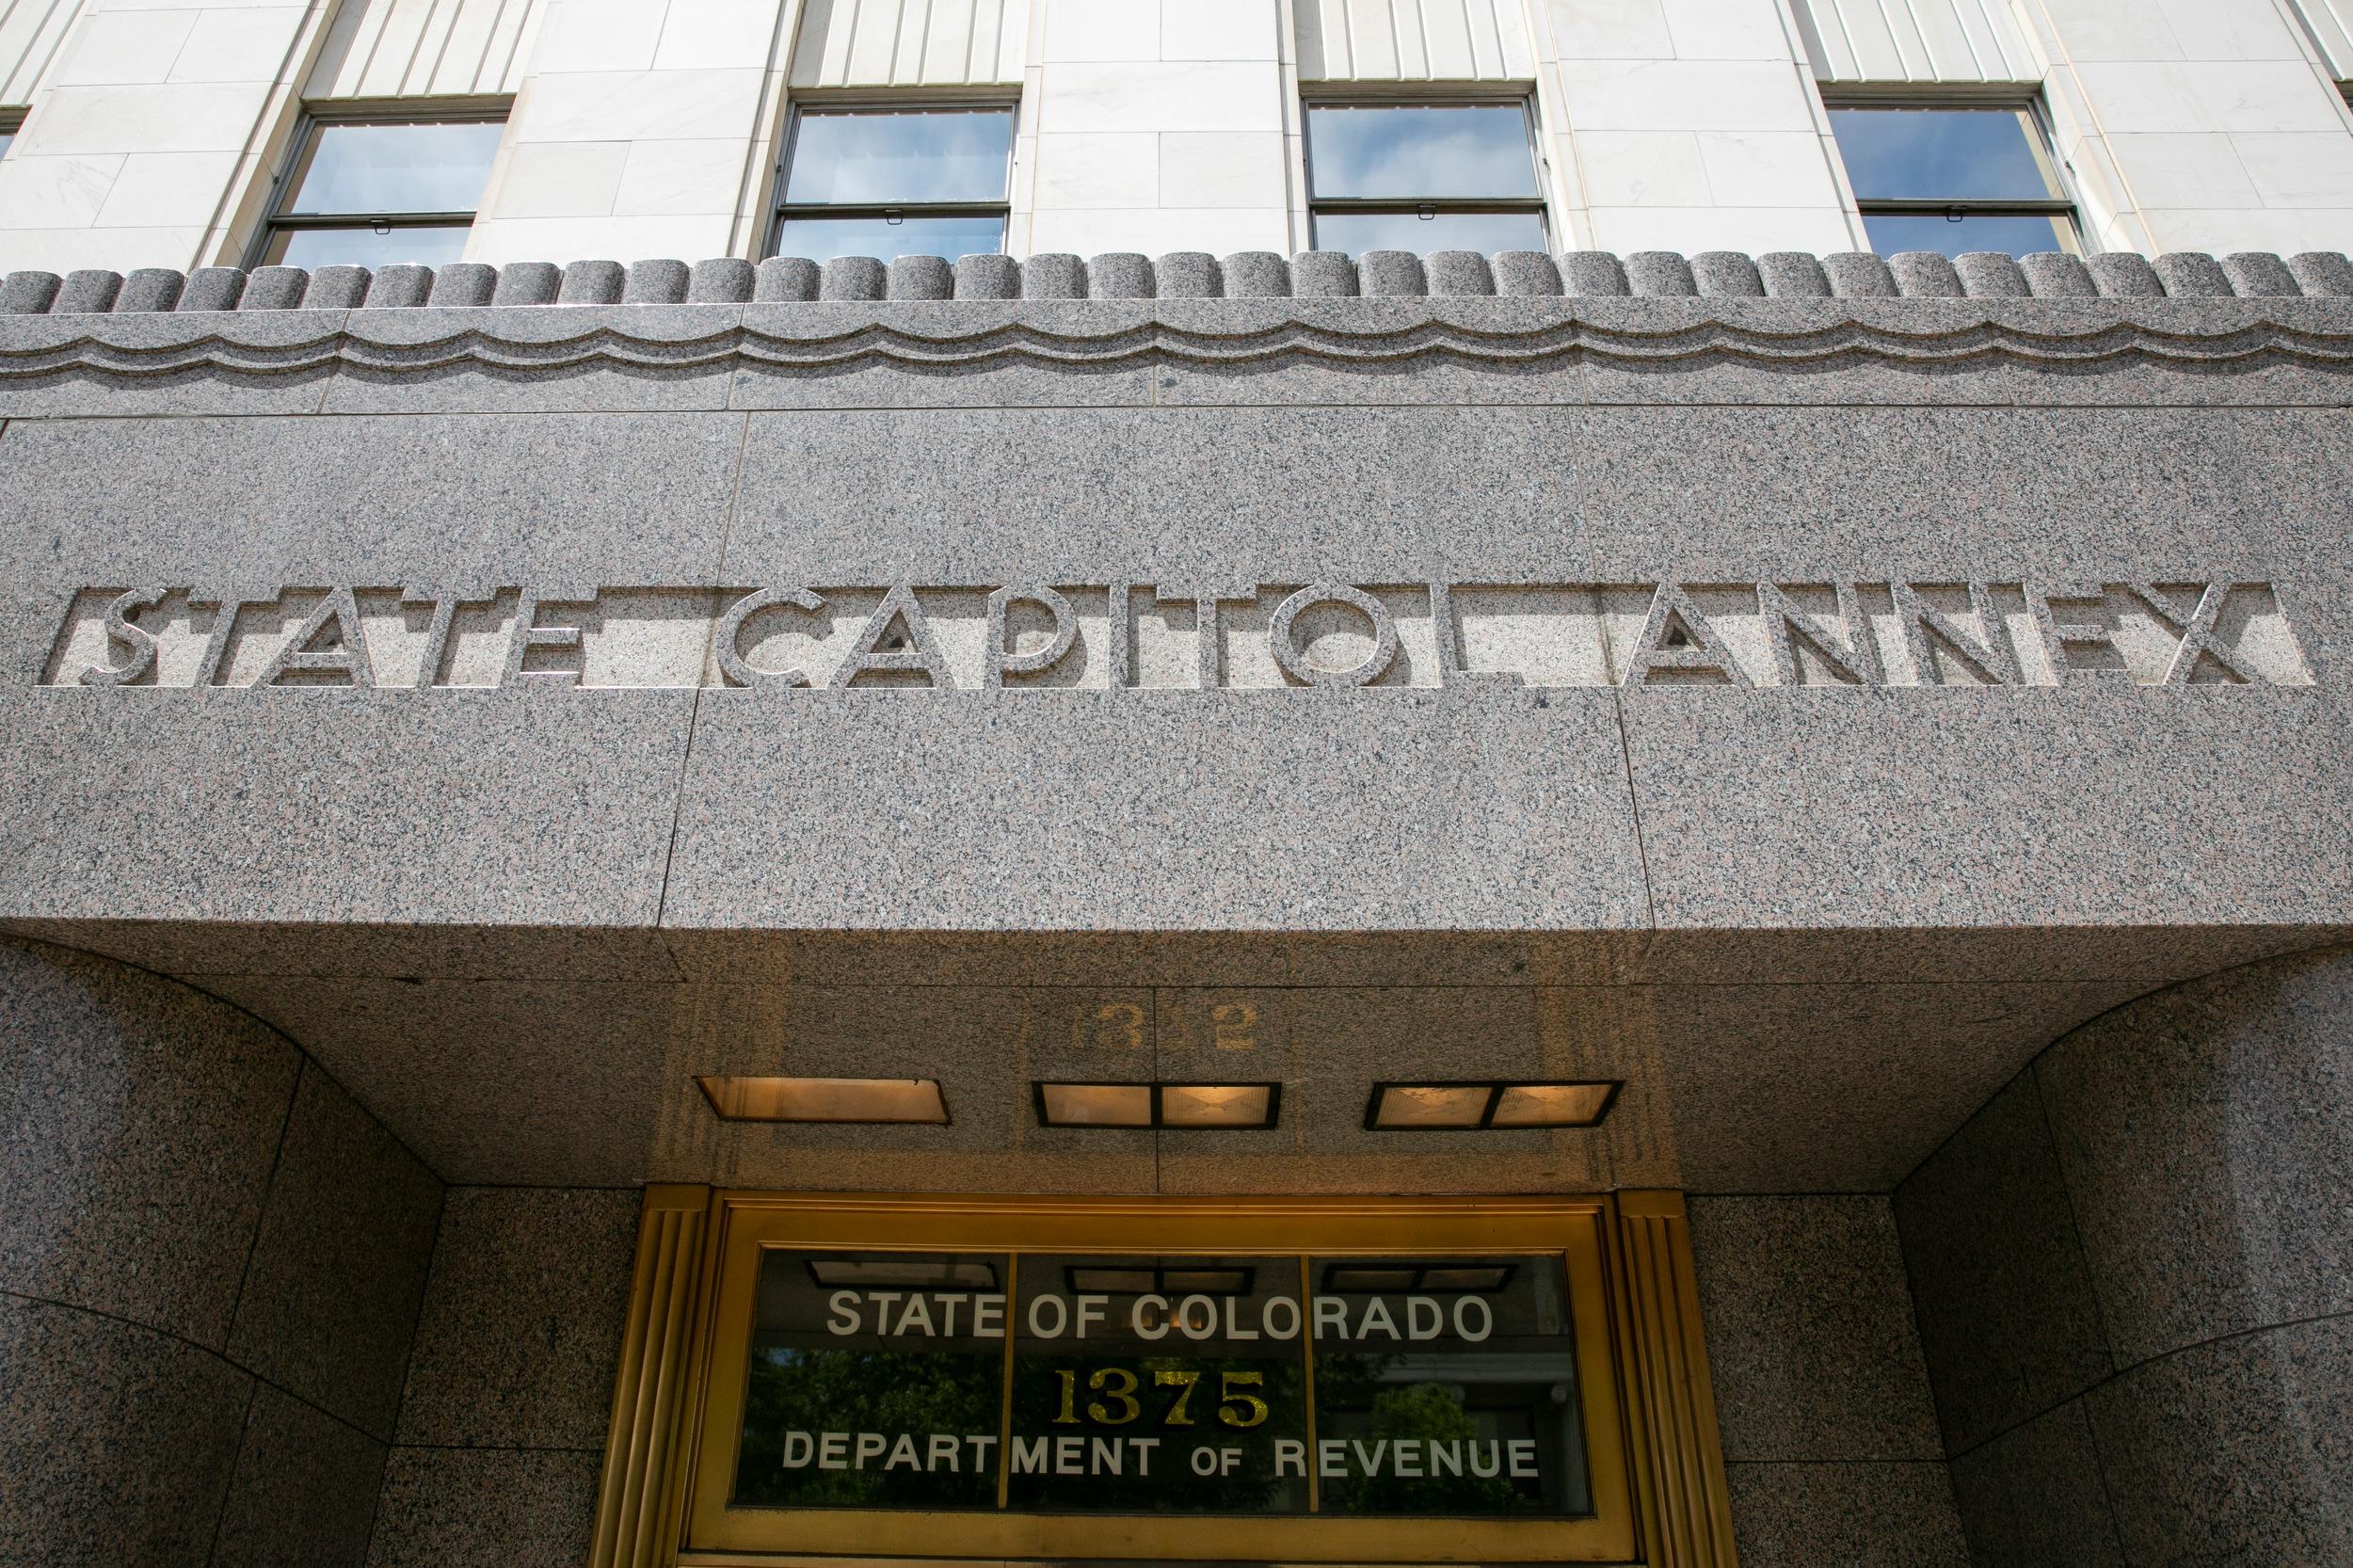 Colorado State Capitol Annex, which houses the state Department of Revenue